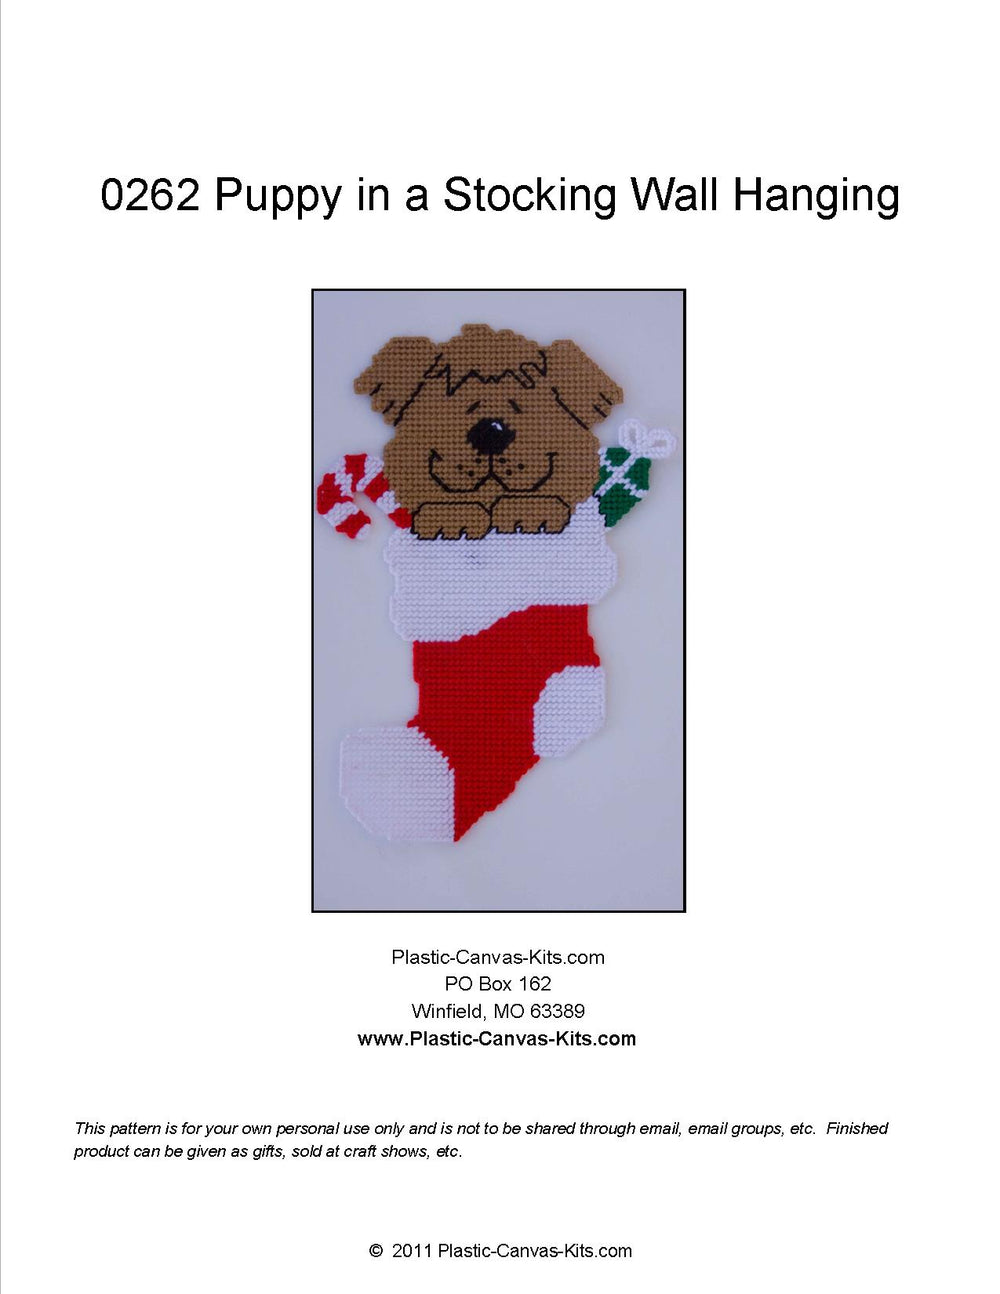 Puppy in Stocking Wall Hanging